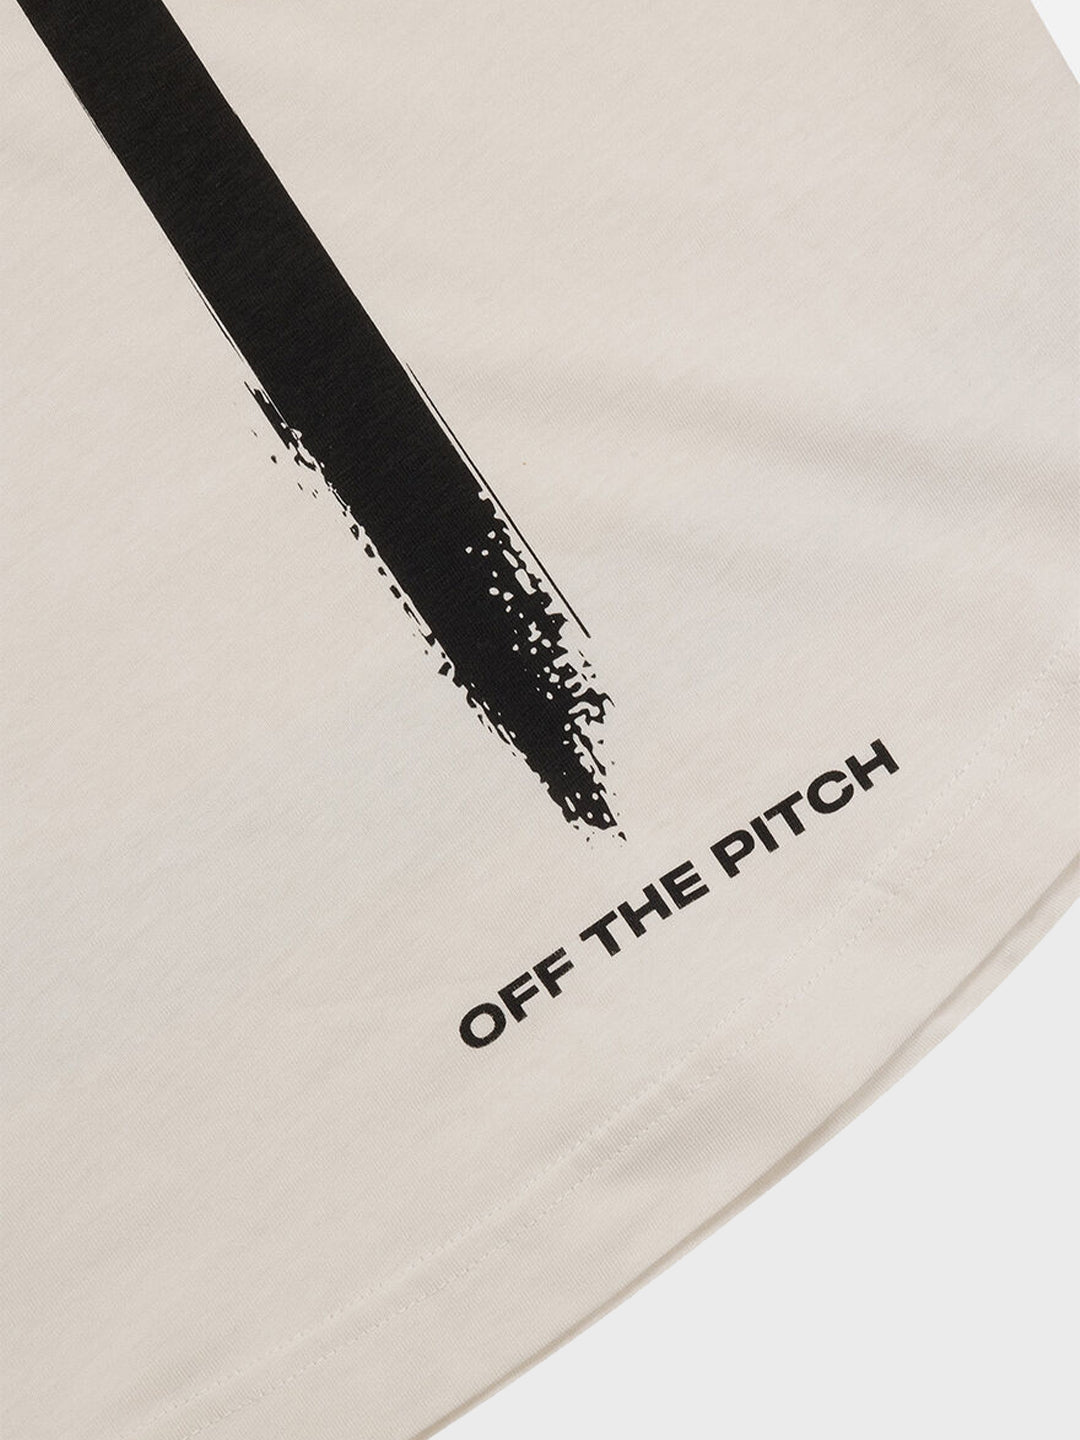 off the pitch t-shirt